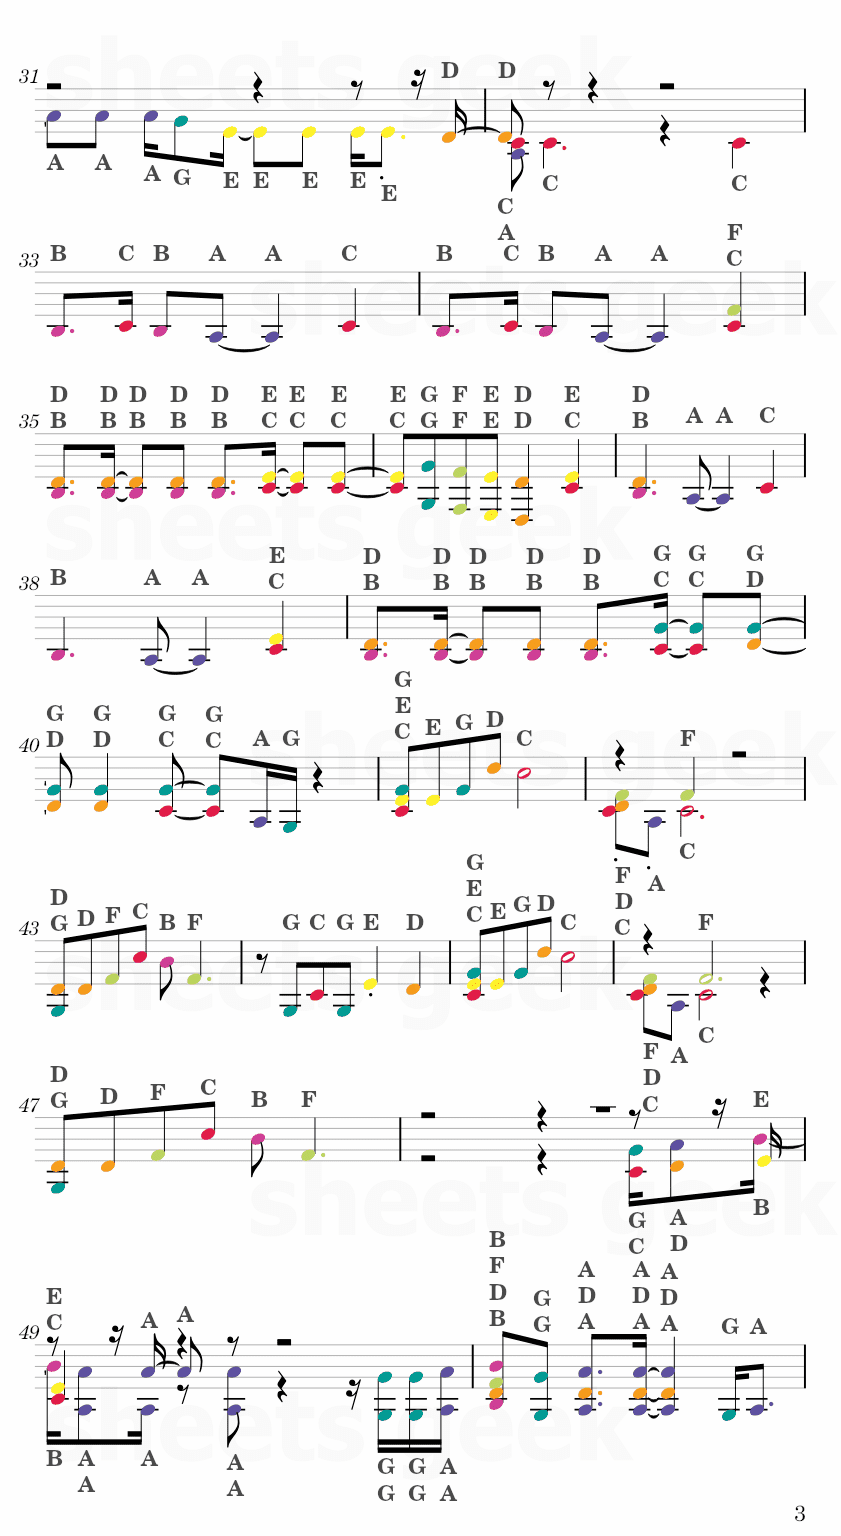 Still Monster - ENHYPEN Easy Sheet Music Free for piano, keyboard, flute, violin, sax, cello page 3